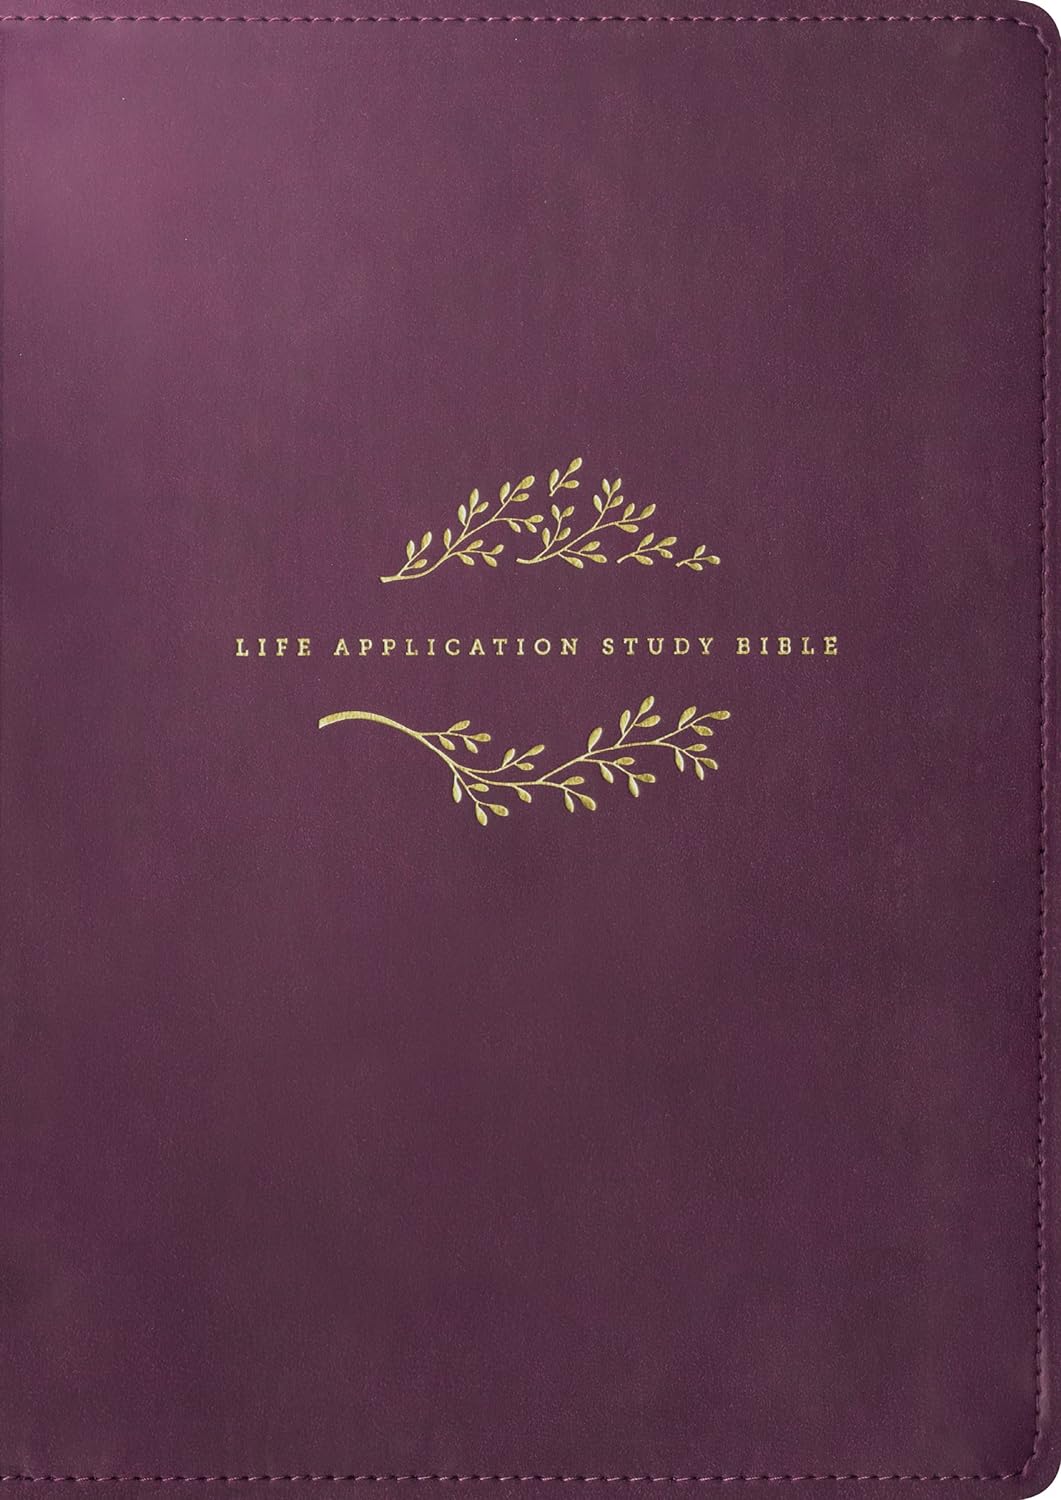 NLT Life Application Study Bible, Third Edition (LeatherLike, Purple, Indexed, Red Letter)